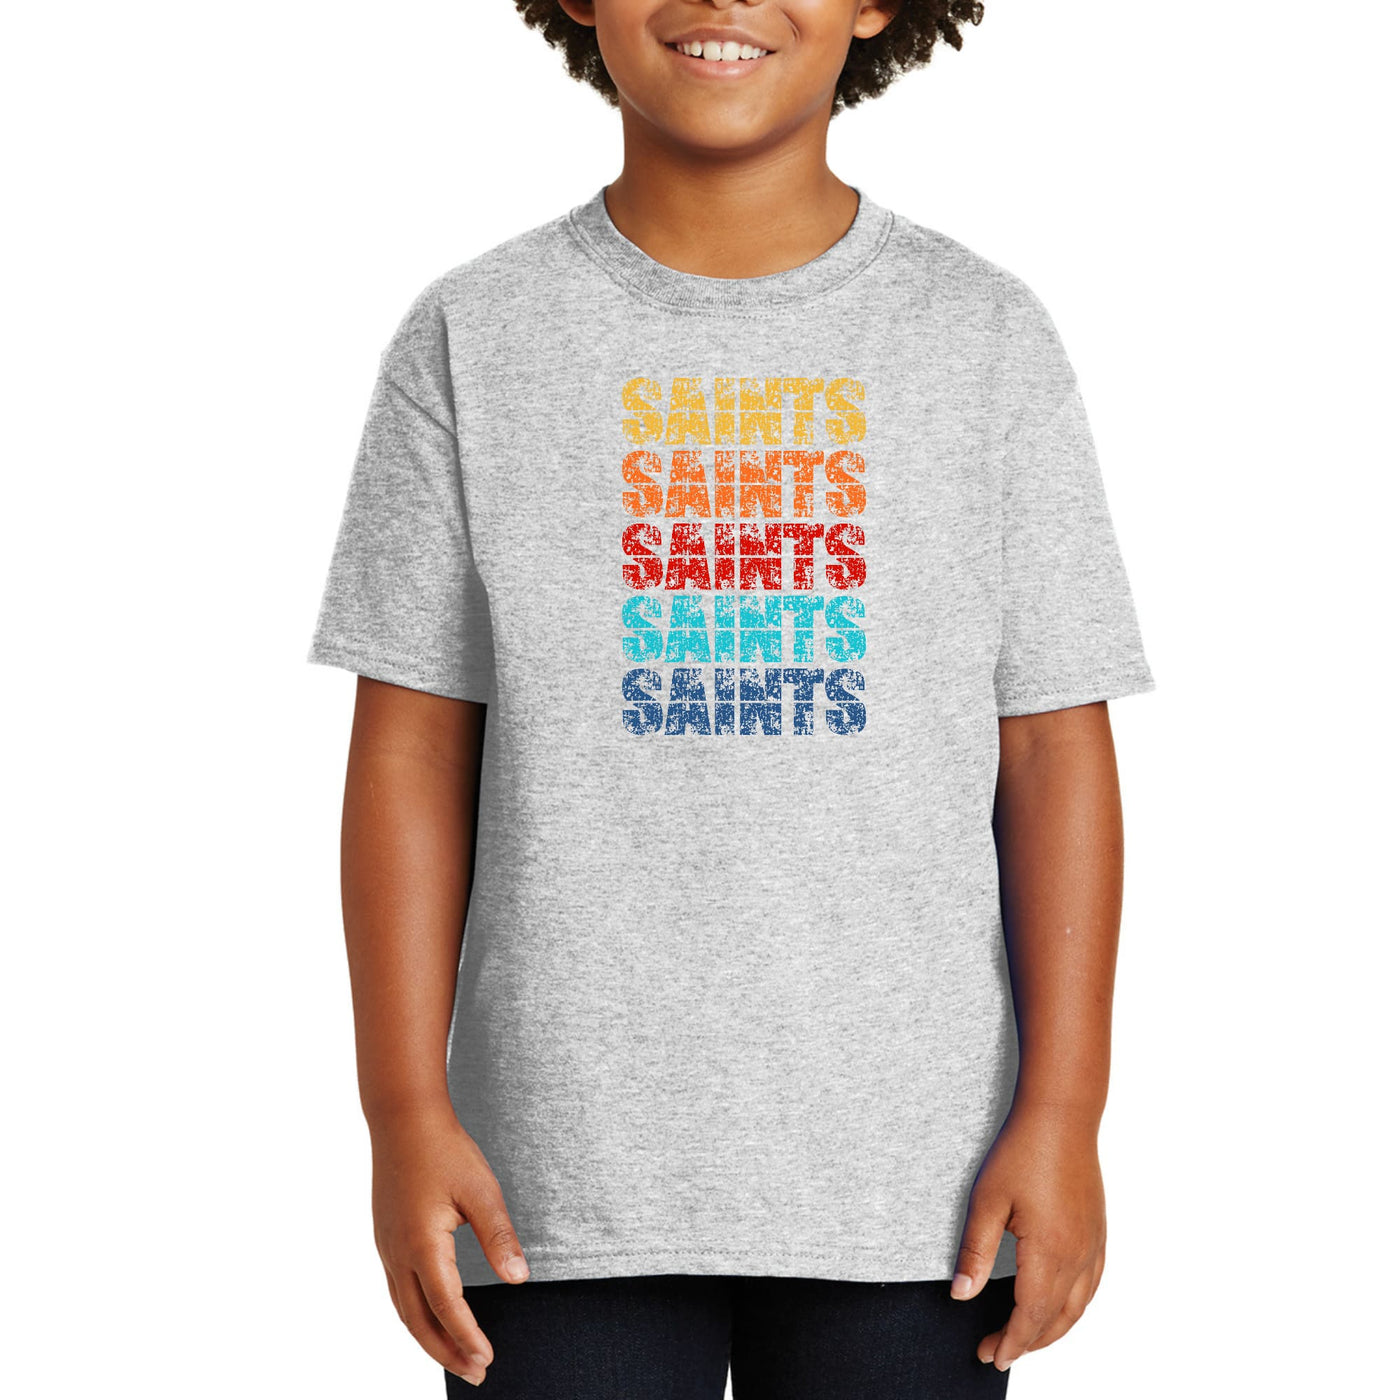 Youth Short Sleeve Graphic T-shirt Saints Colorful Art Illustration - Youth